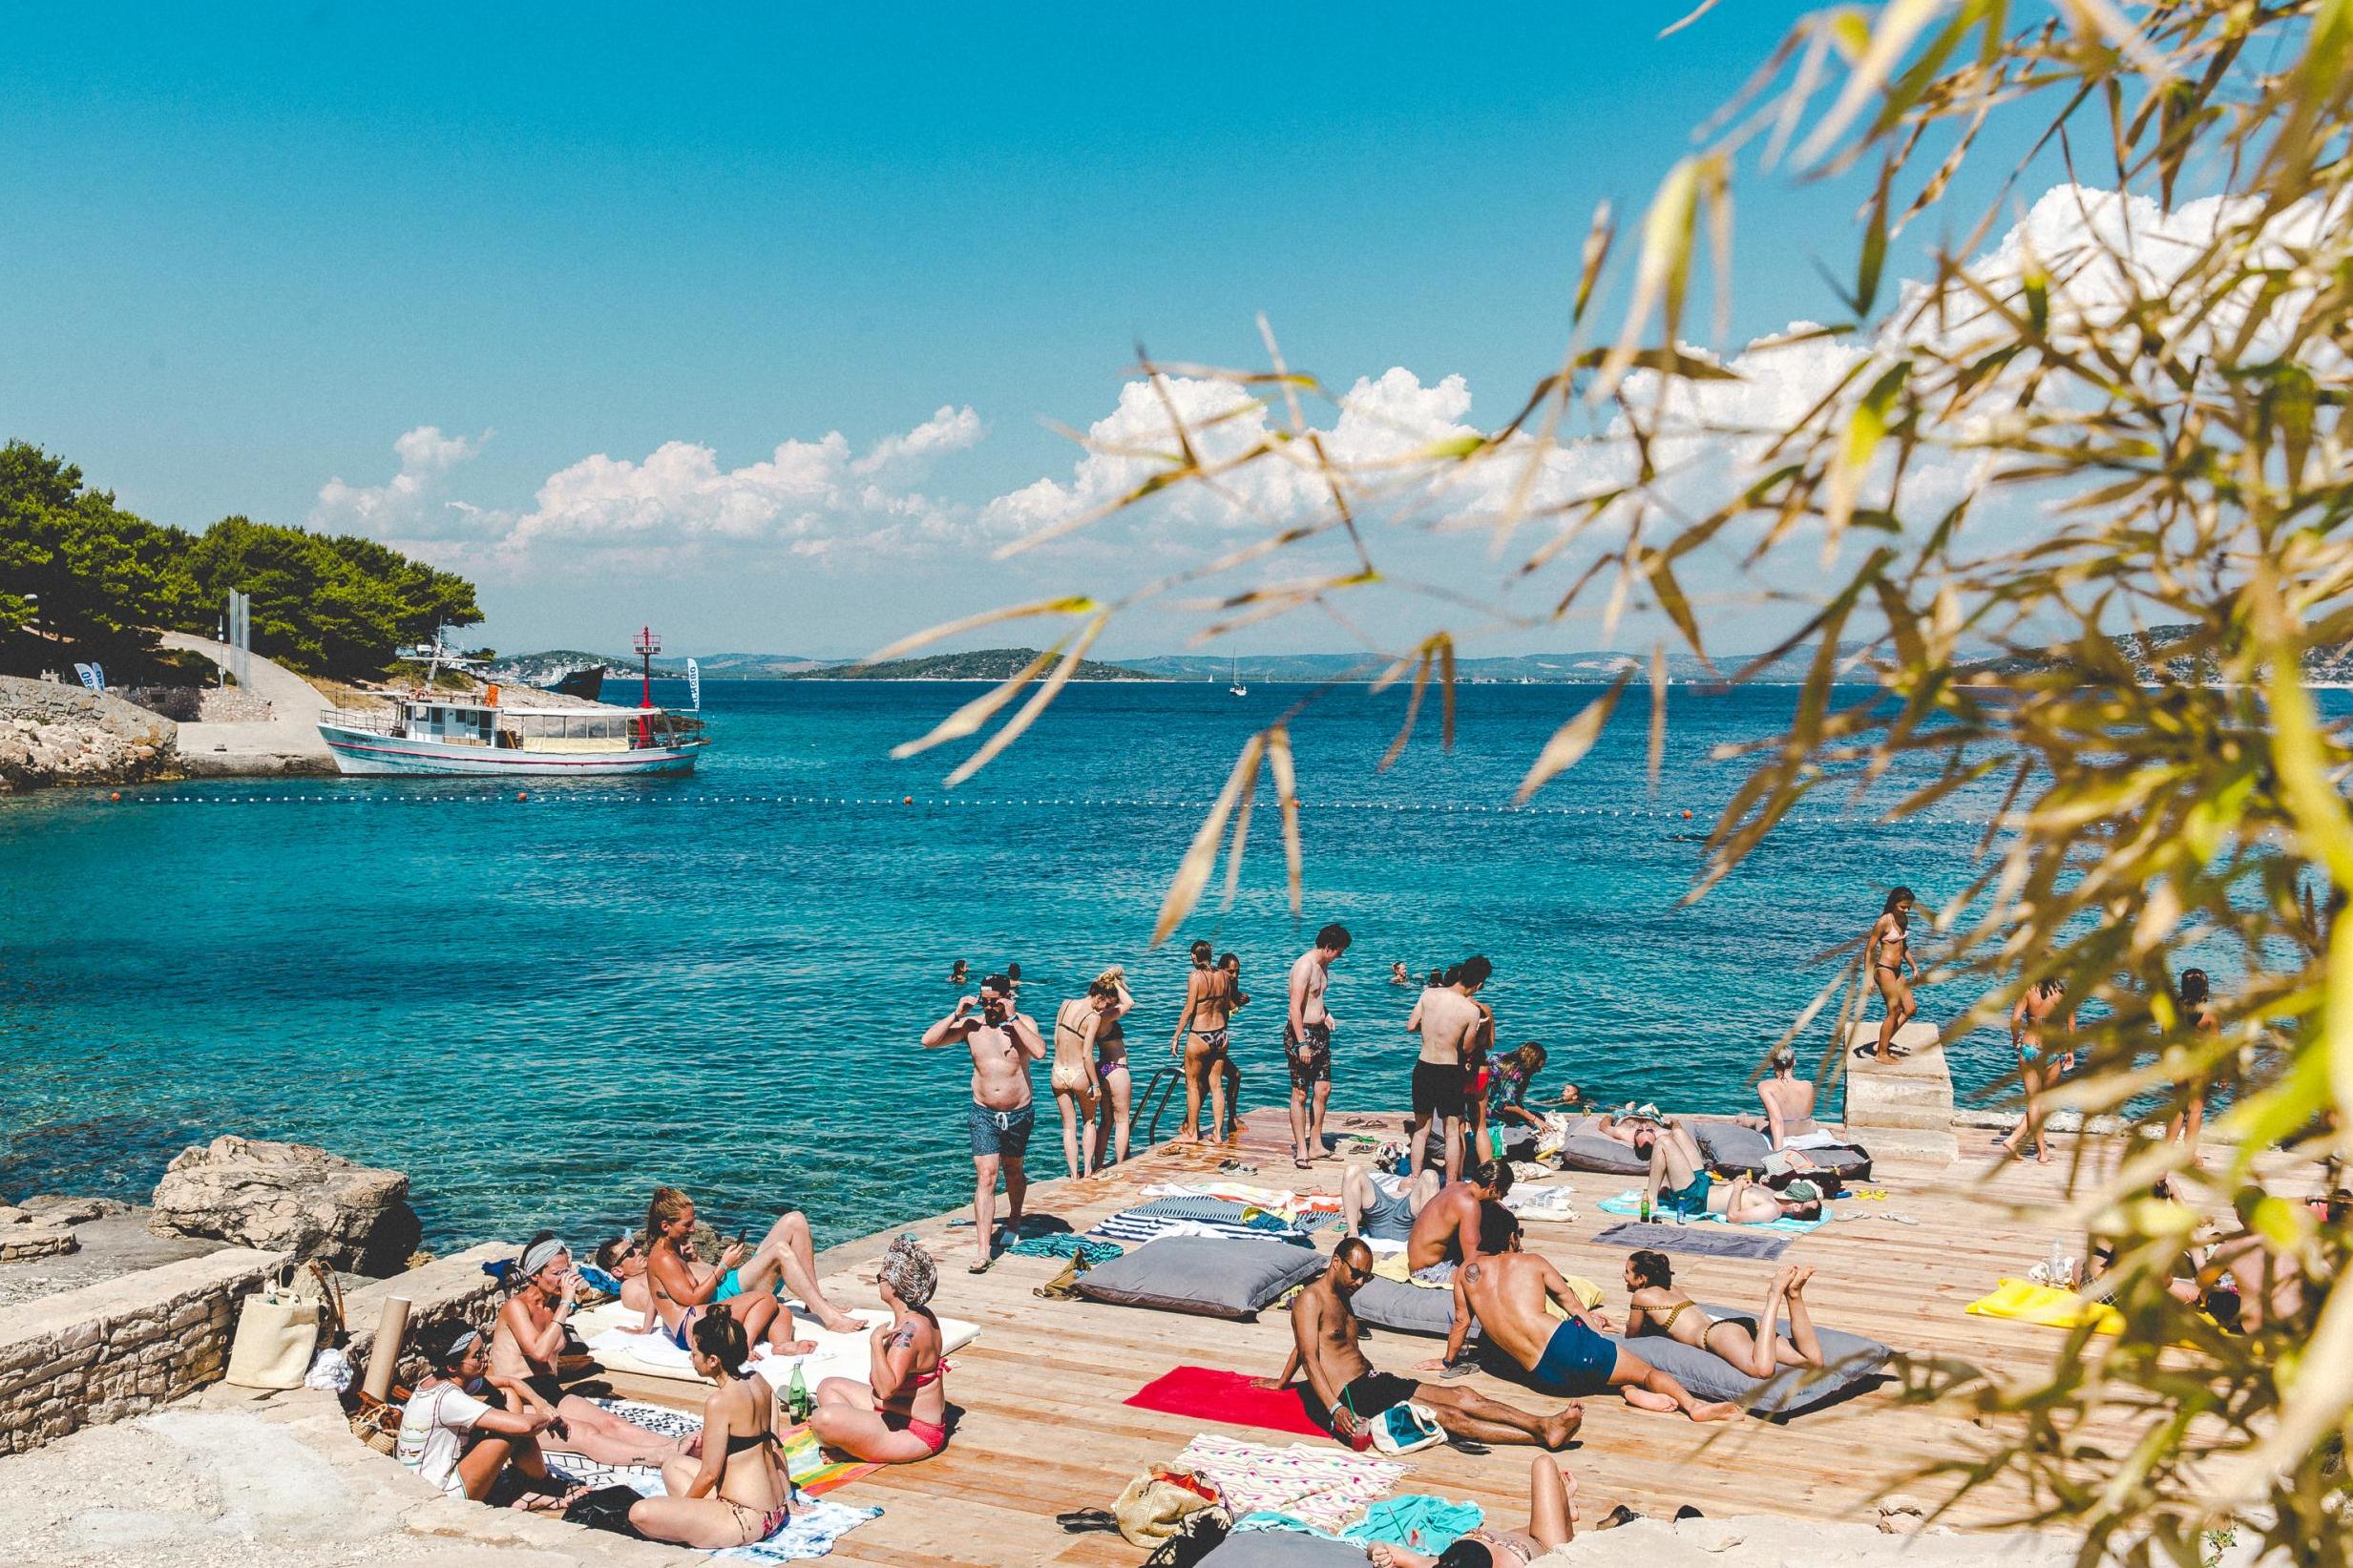 After a whirlwind night in London, guests can relax in Croatia